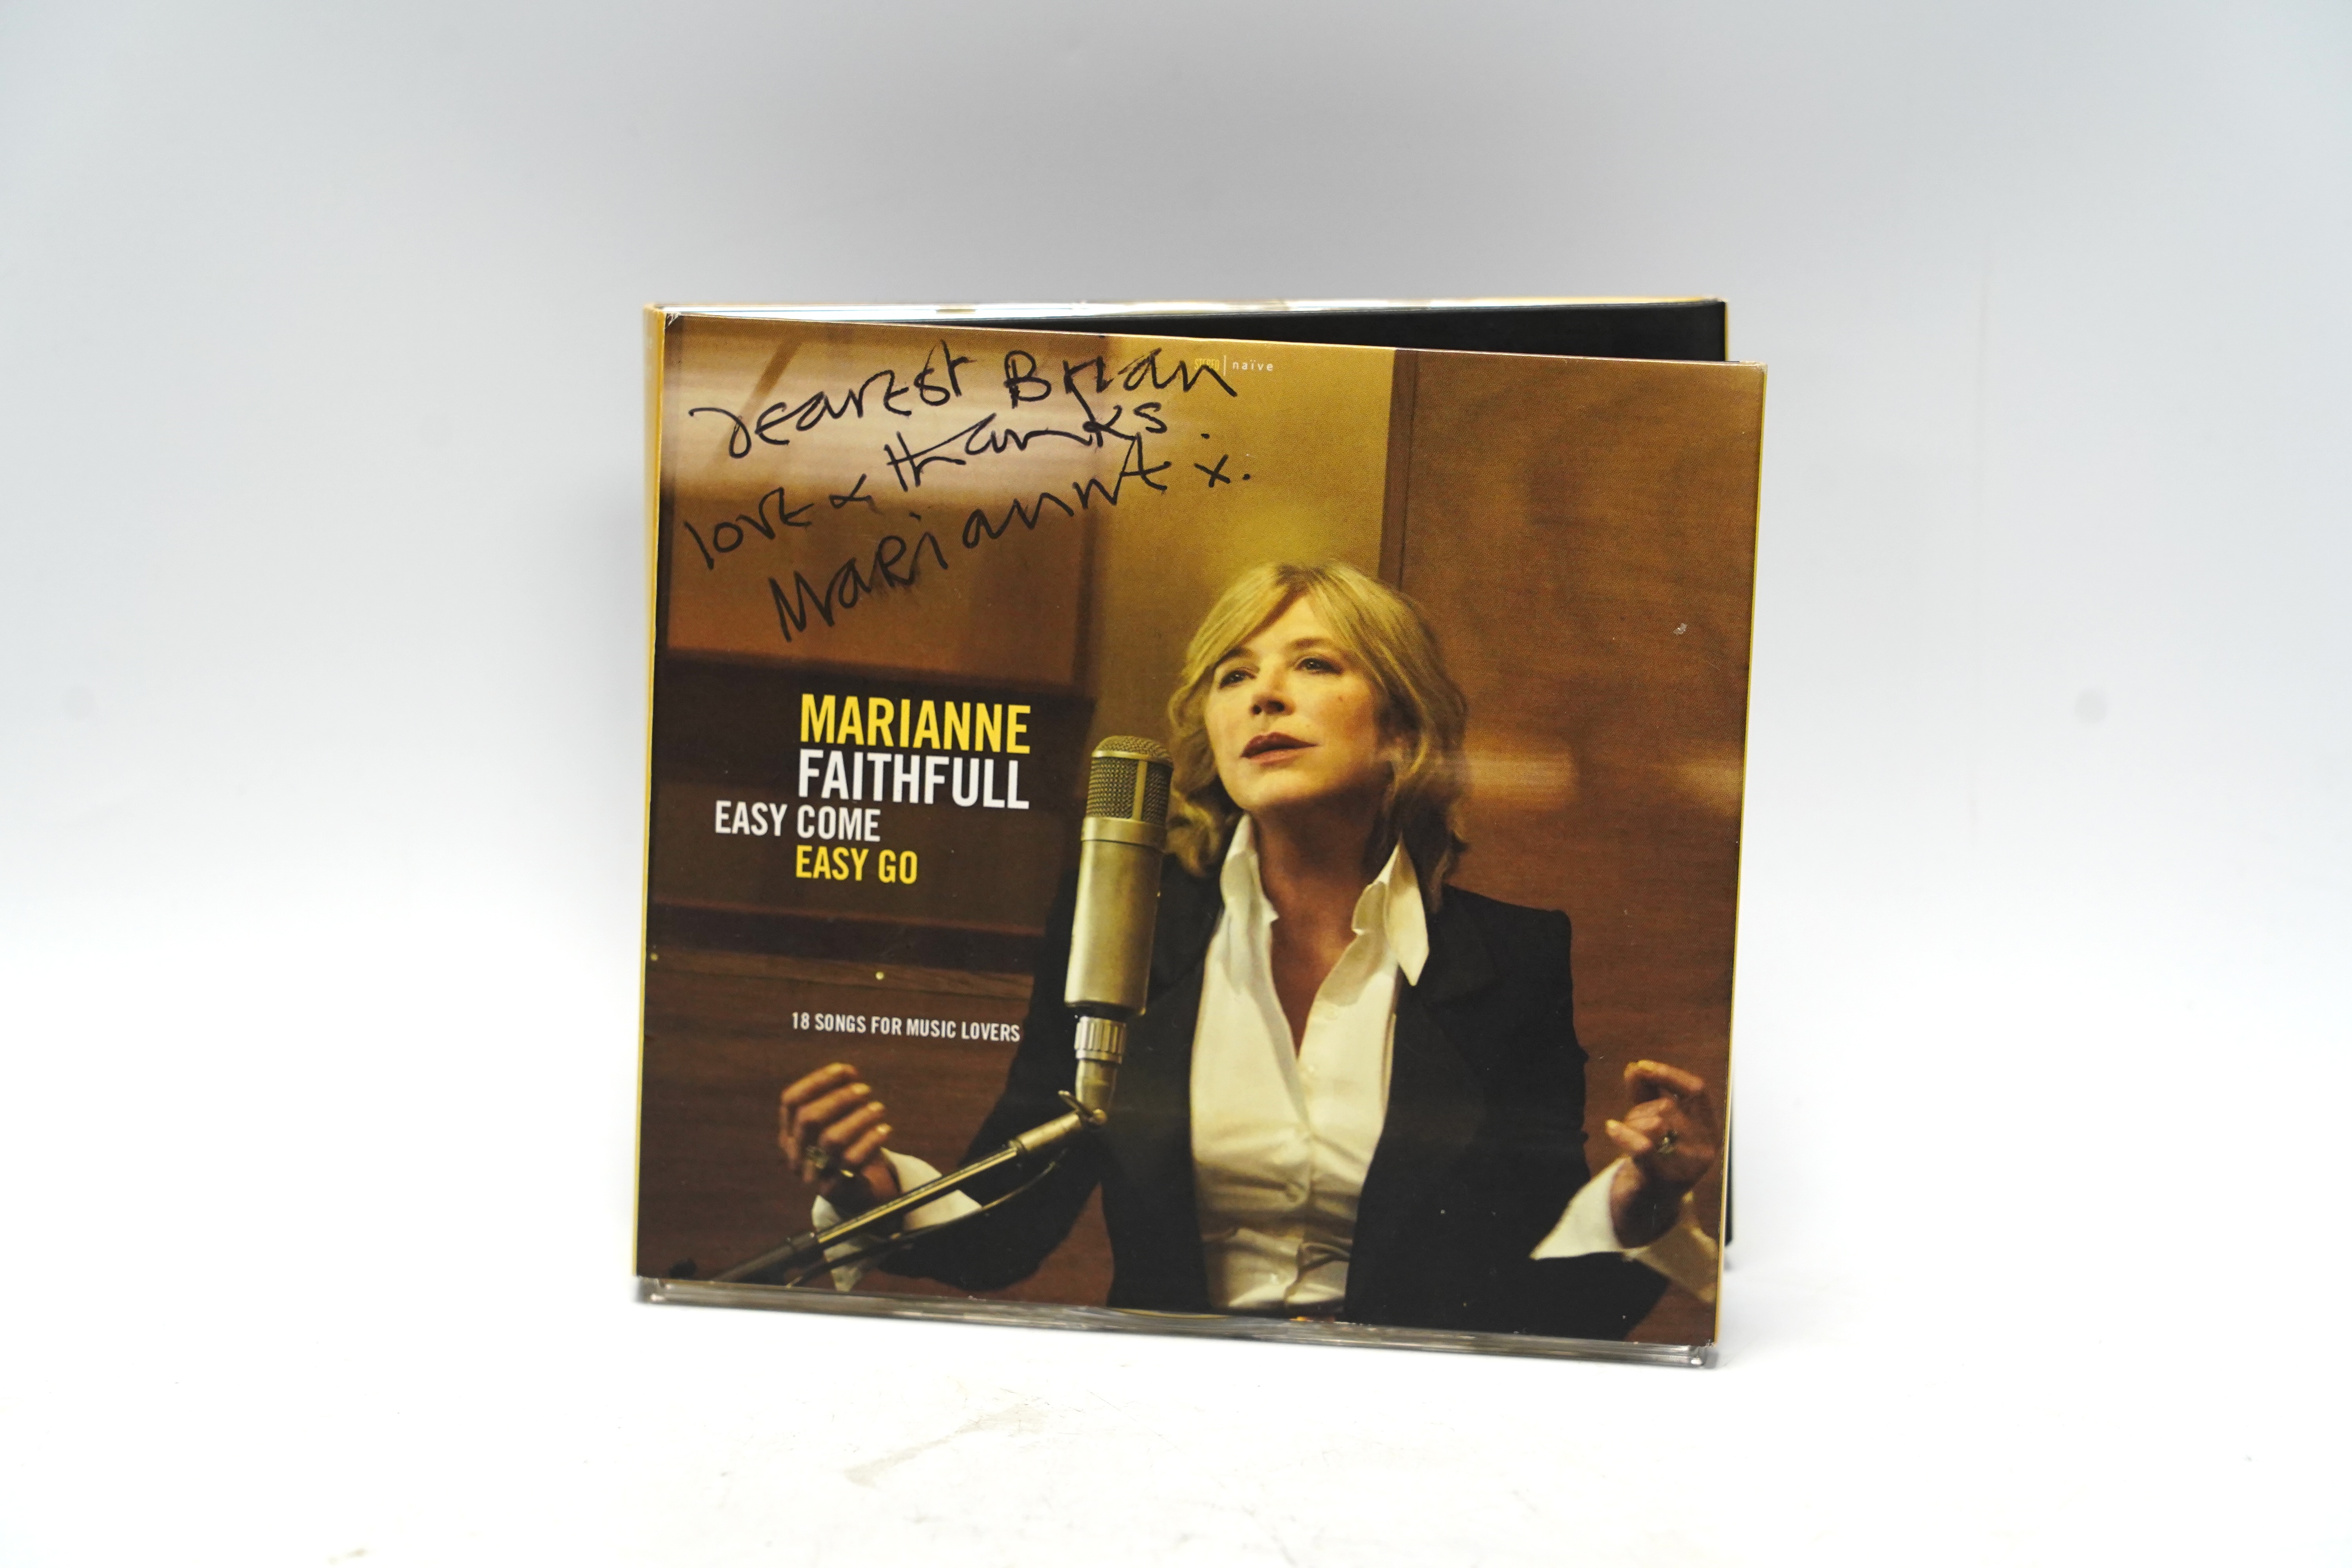 A Marianne Faithful autographed CD; ‘Easy Come Easy Go’ with dedication to the front cover to Brian Matthew, together with a late 1960s black and white press photograph of her in a BBC studio, credited to Axel Poignant t